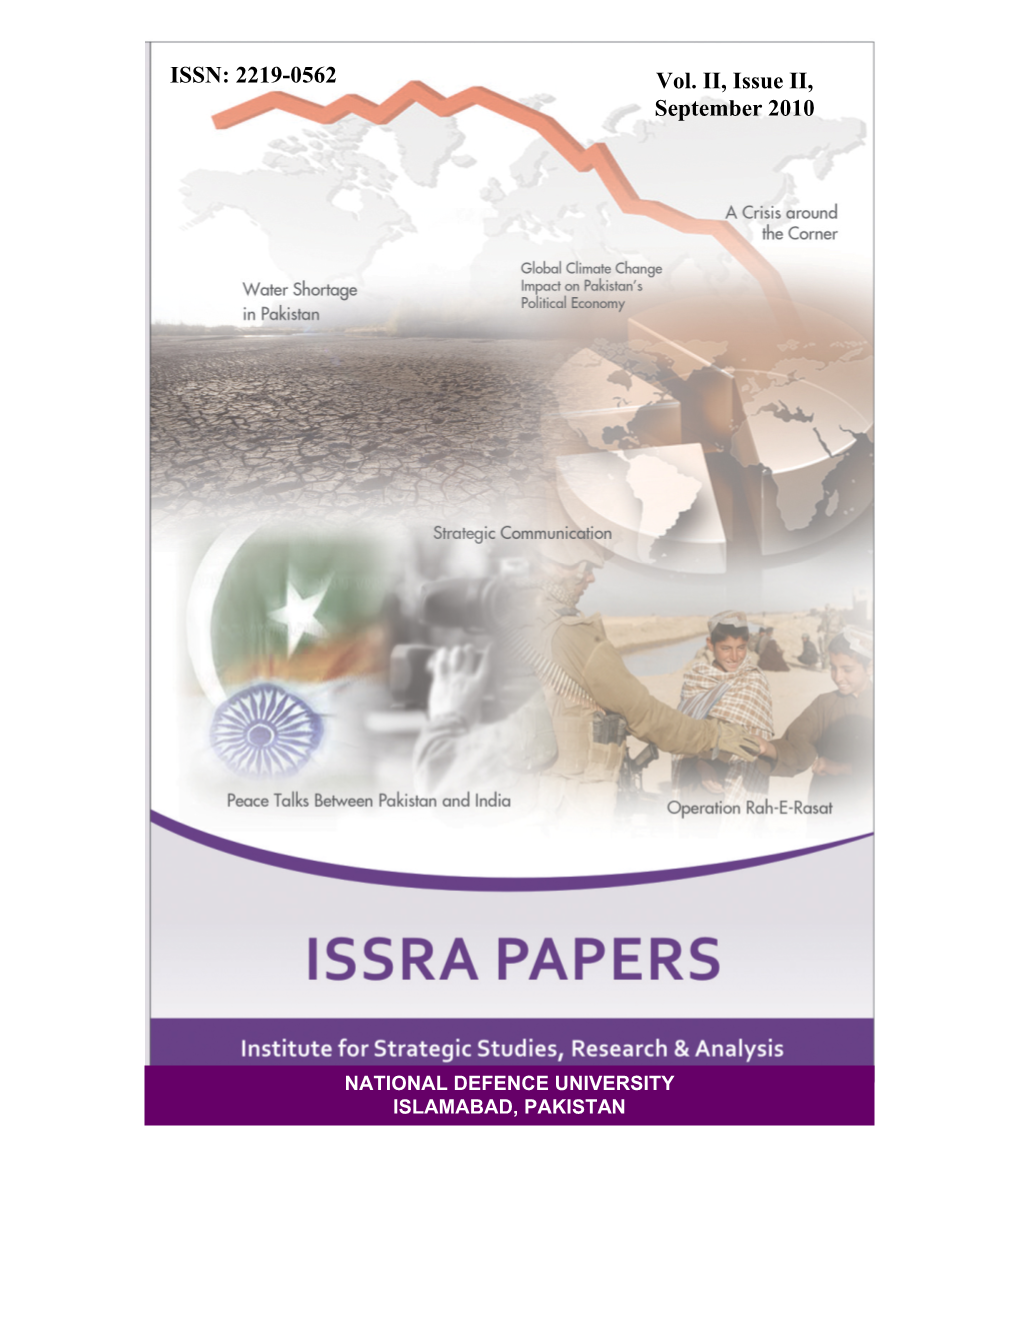 ISSRA PAPERS Institute for Strategic Studies, Research & Analysis National Defence University, Islamabad